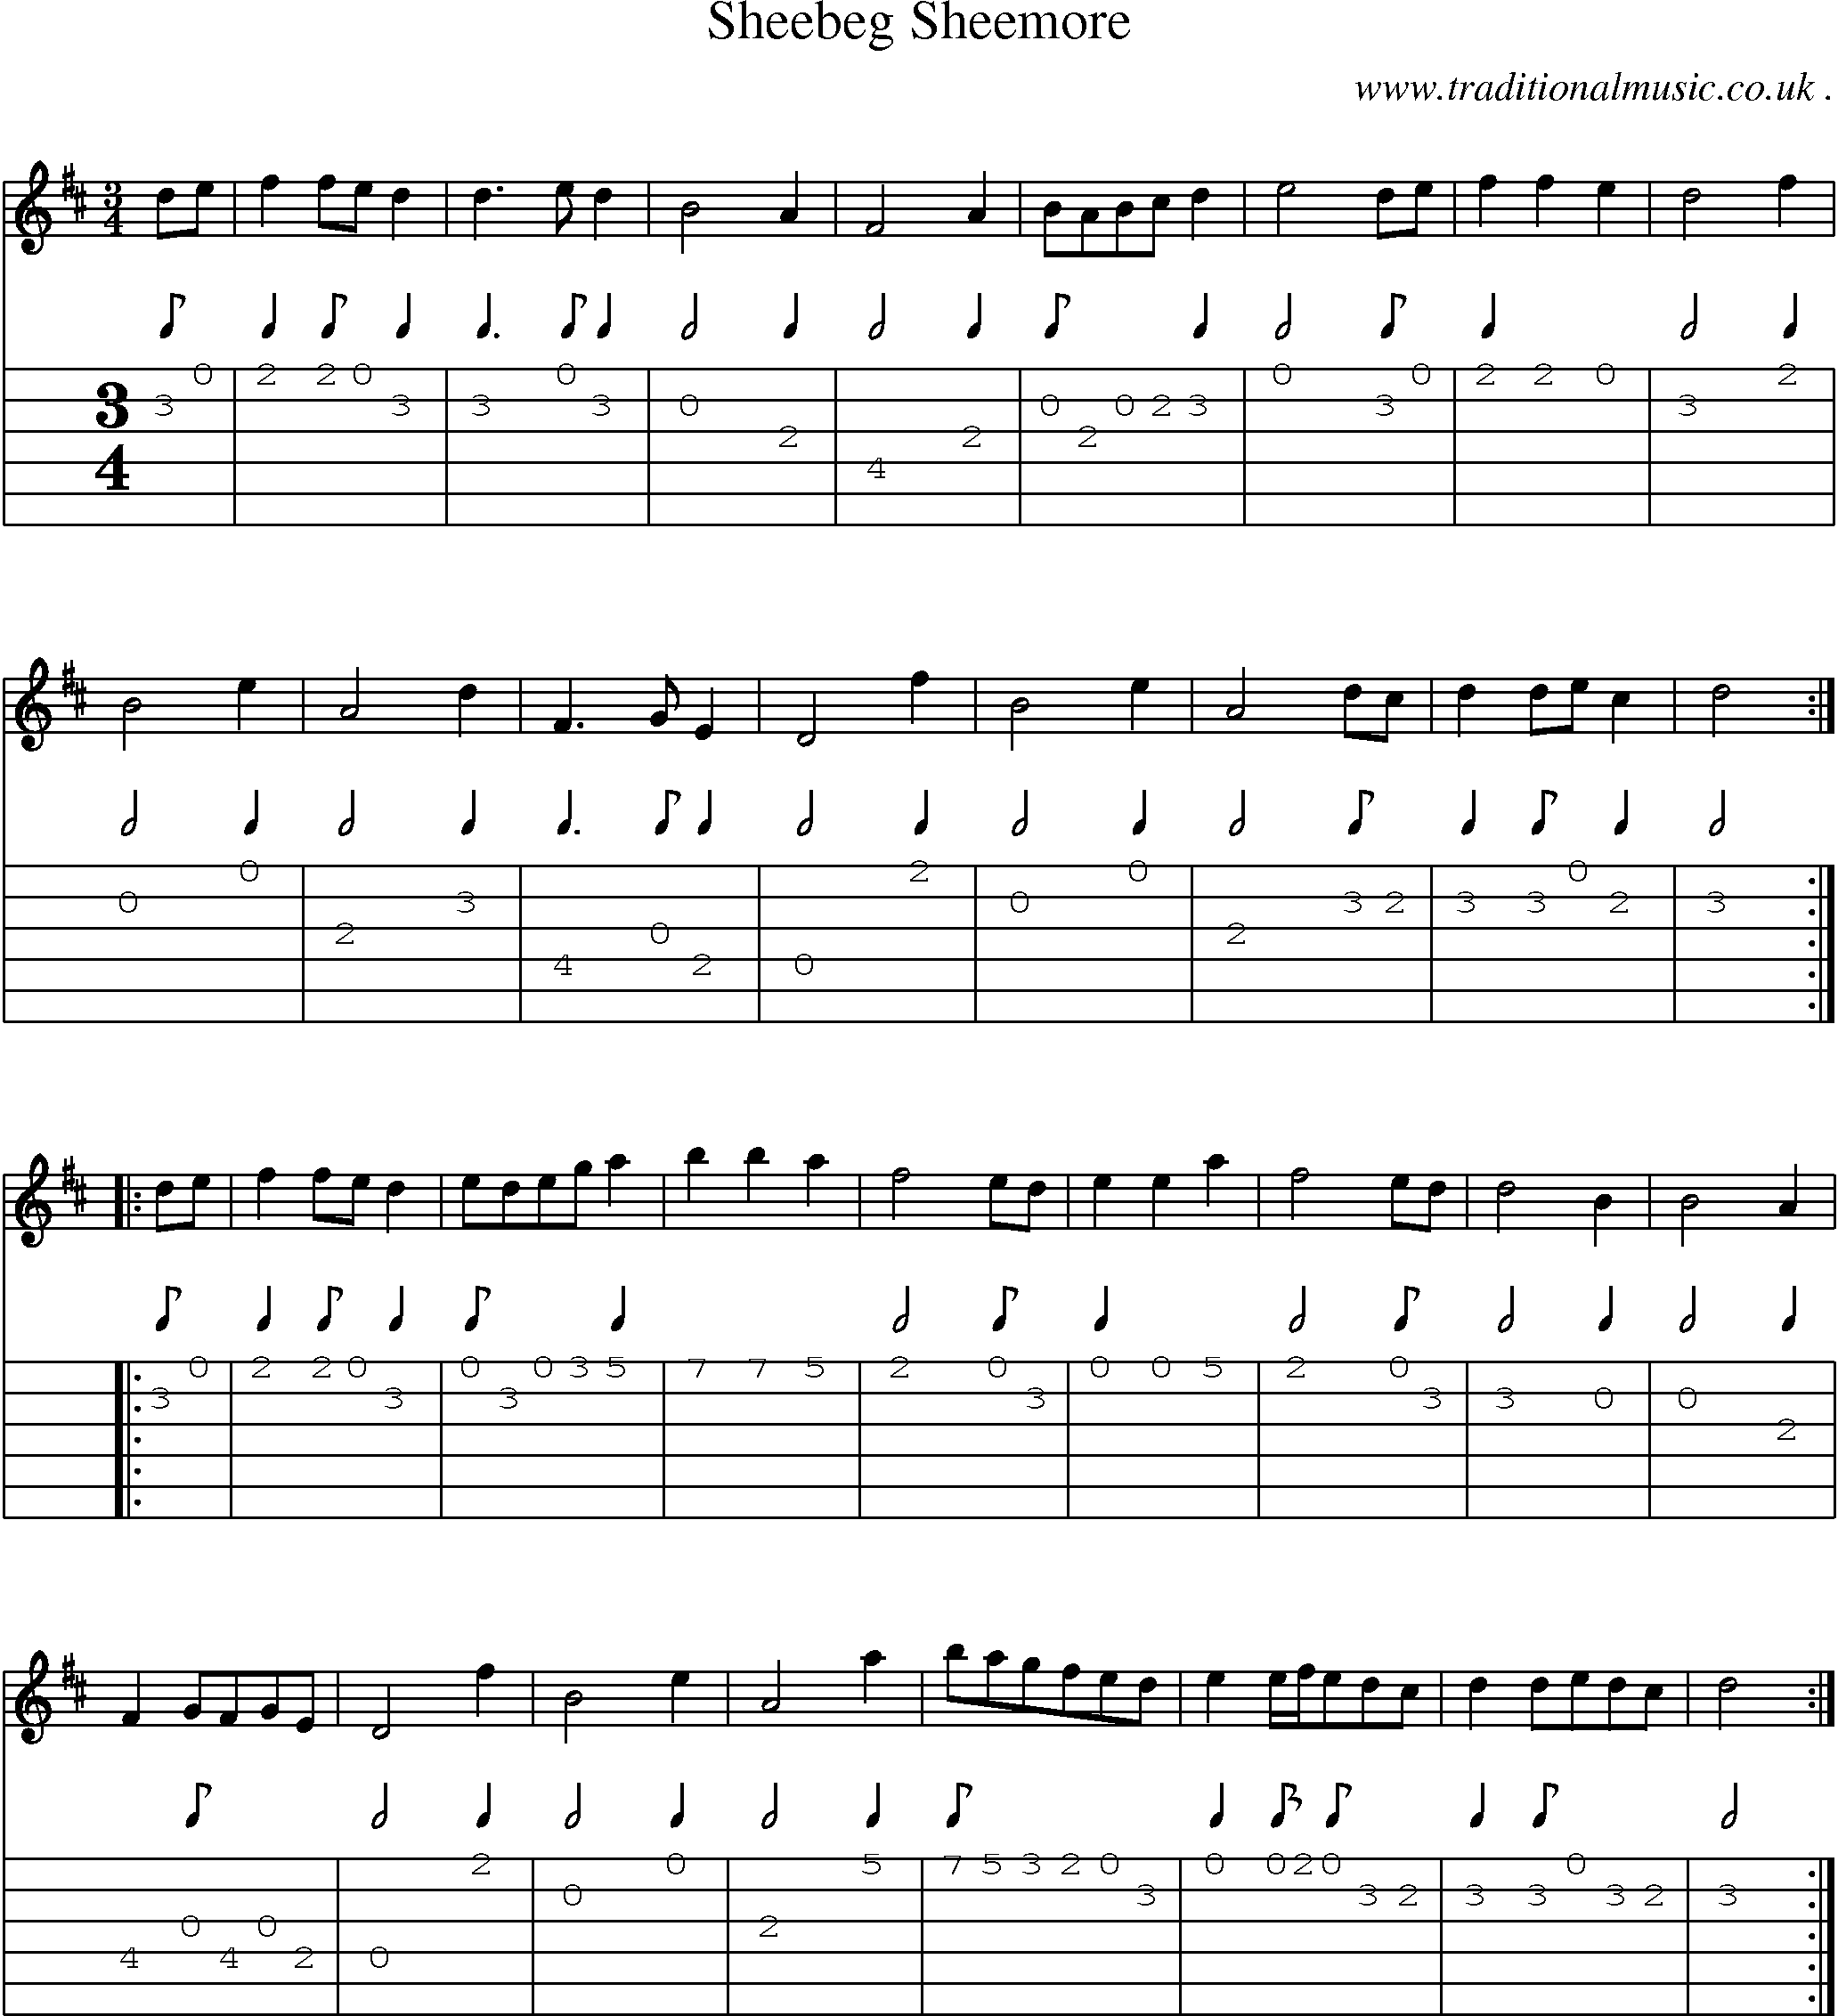 Sheet-Music and Guitar Tabs for Sheebeg Sheemore